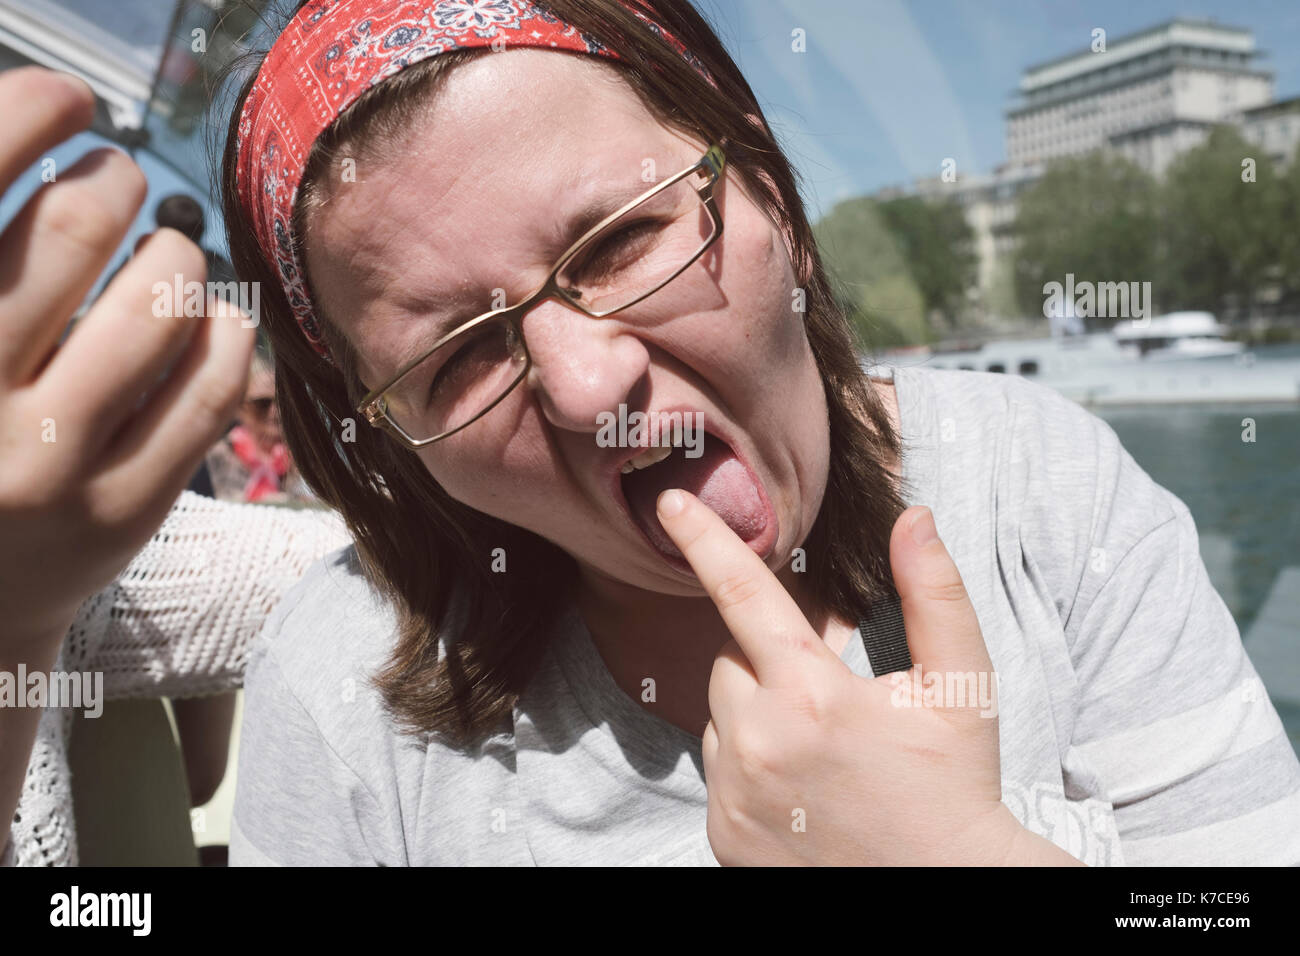 A woman making funny face by sticking her tongue out Stock Photo